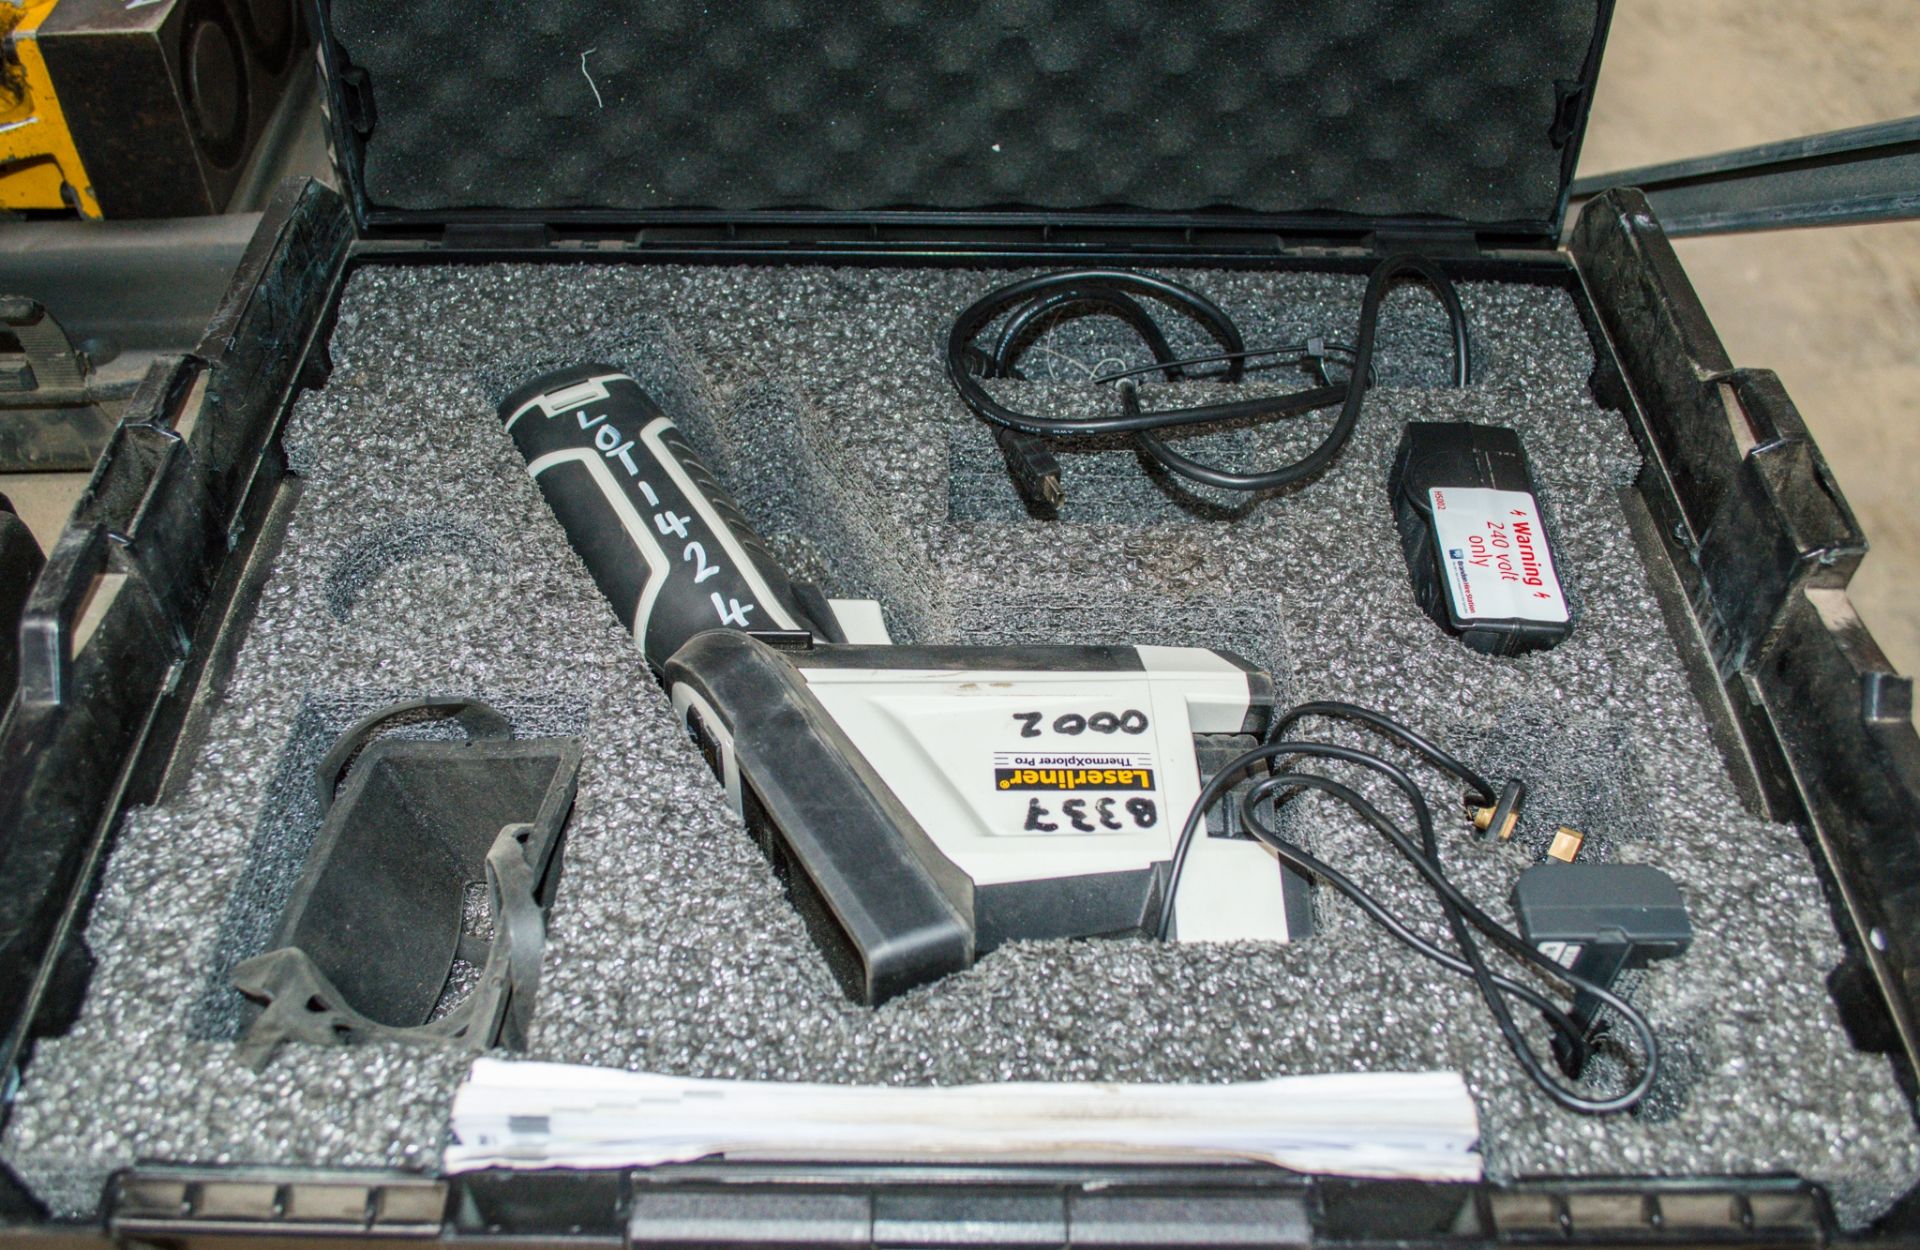 Laserliner Thermoxplorer Pro thermographics camera c/w 2 batteries, charger & carry case B3370002